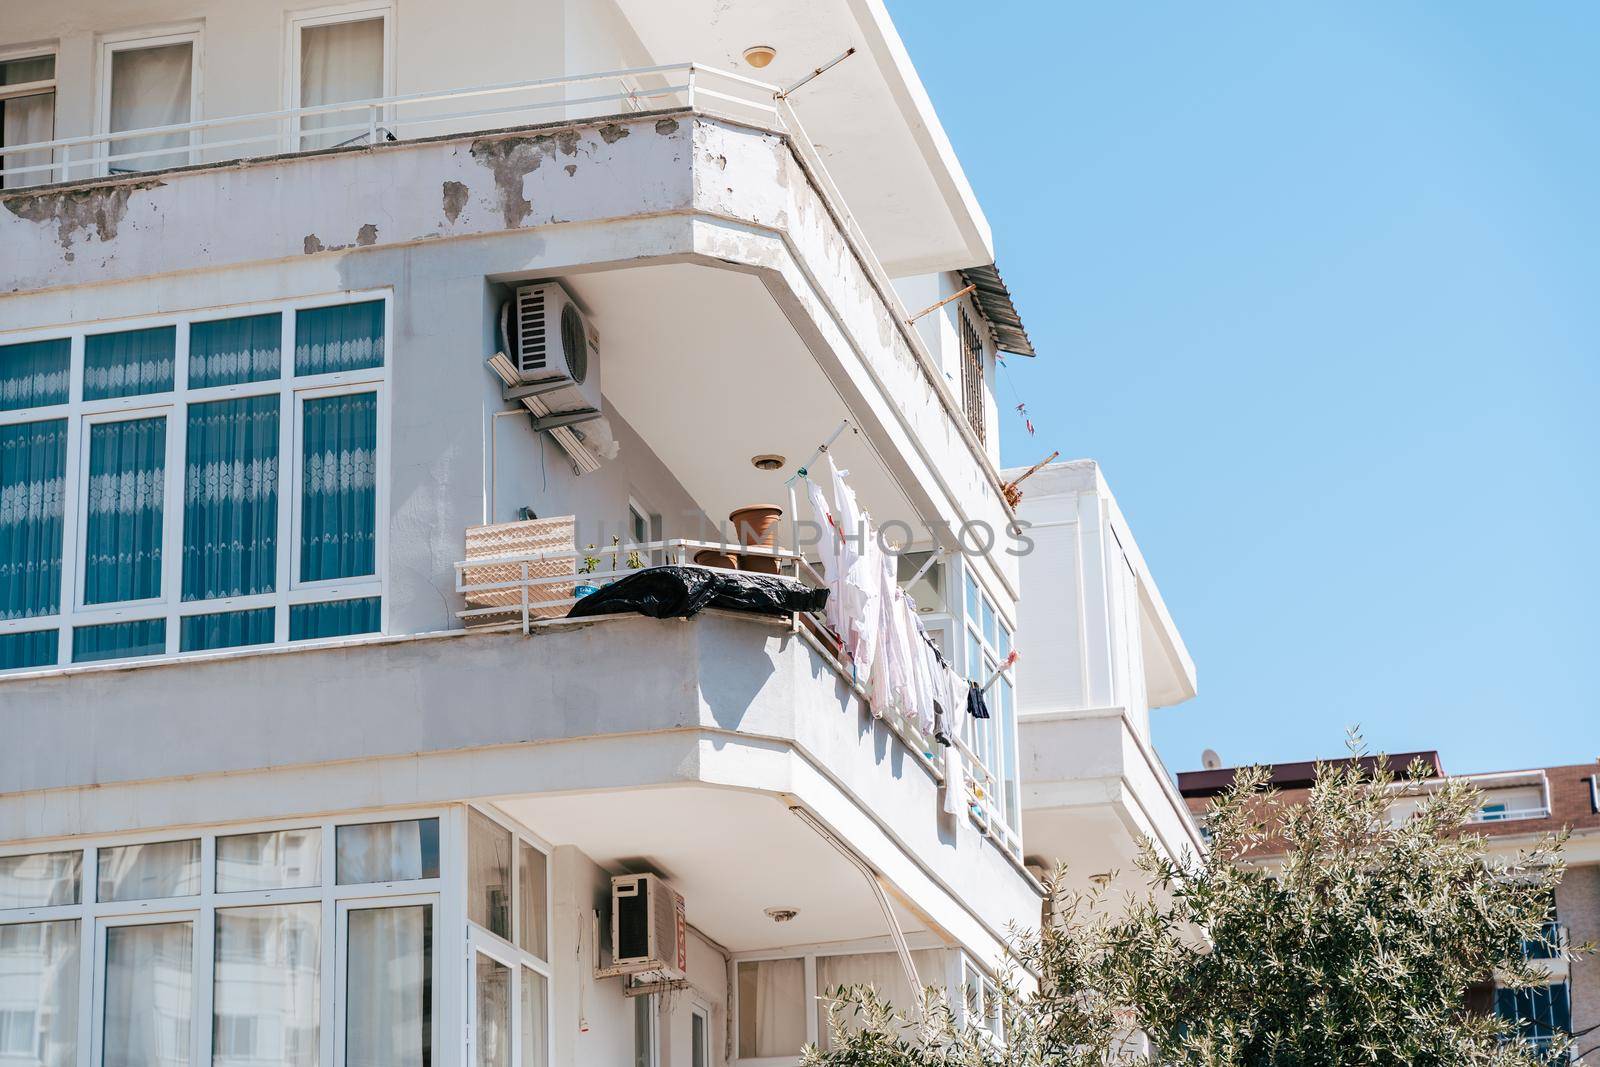 White shabby rundown residential building with drying clothes on the balcony. Simple people living. Scuffed worn-out residential block with old air conditioning system.